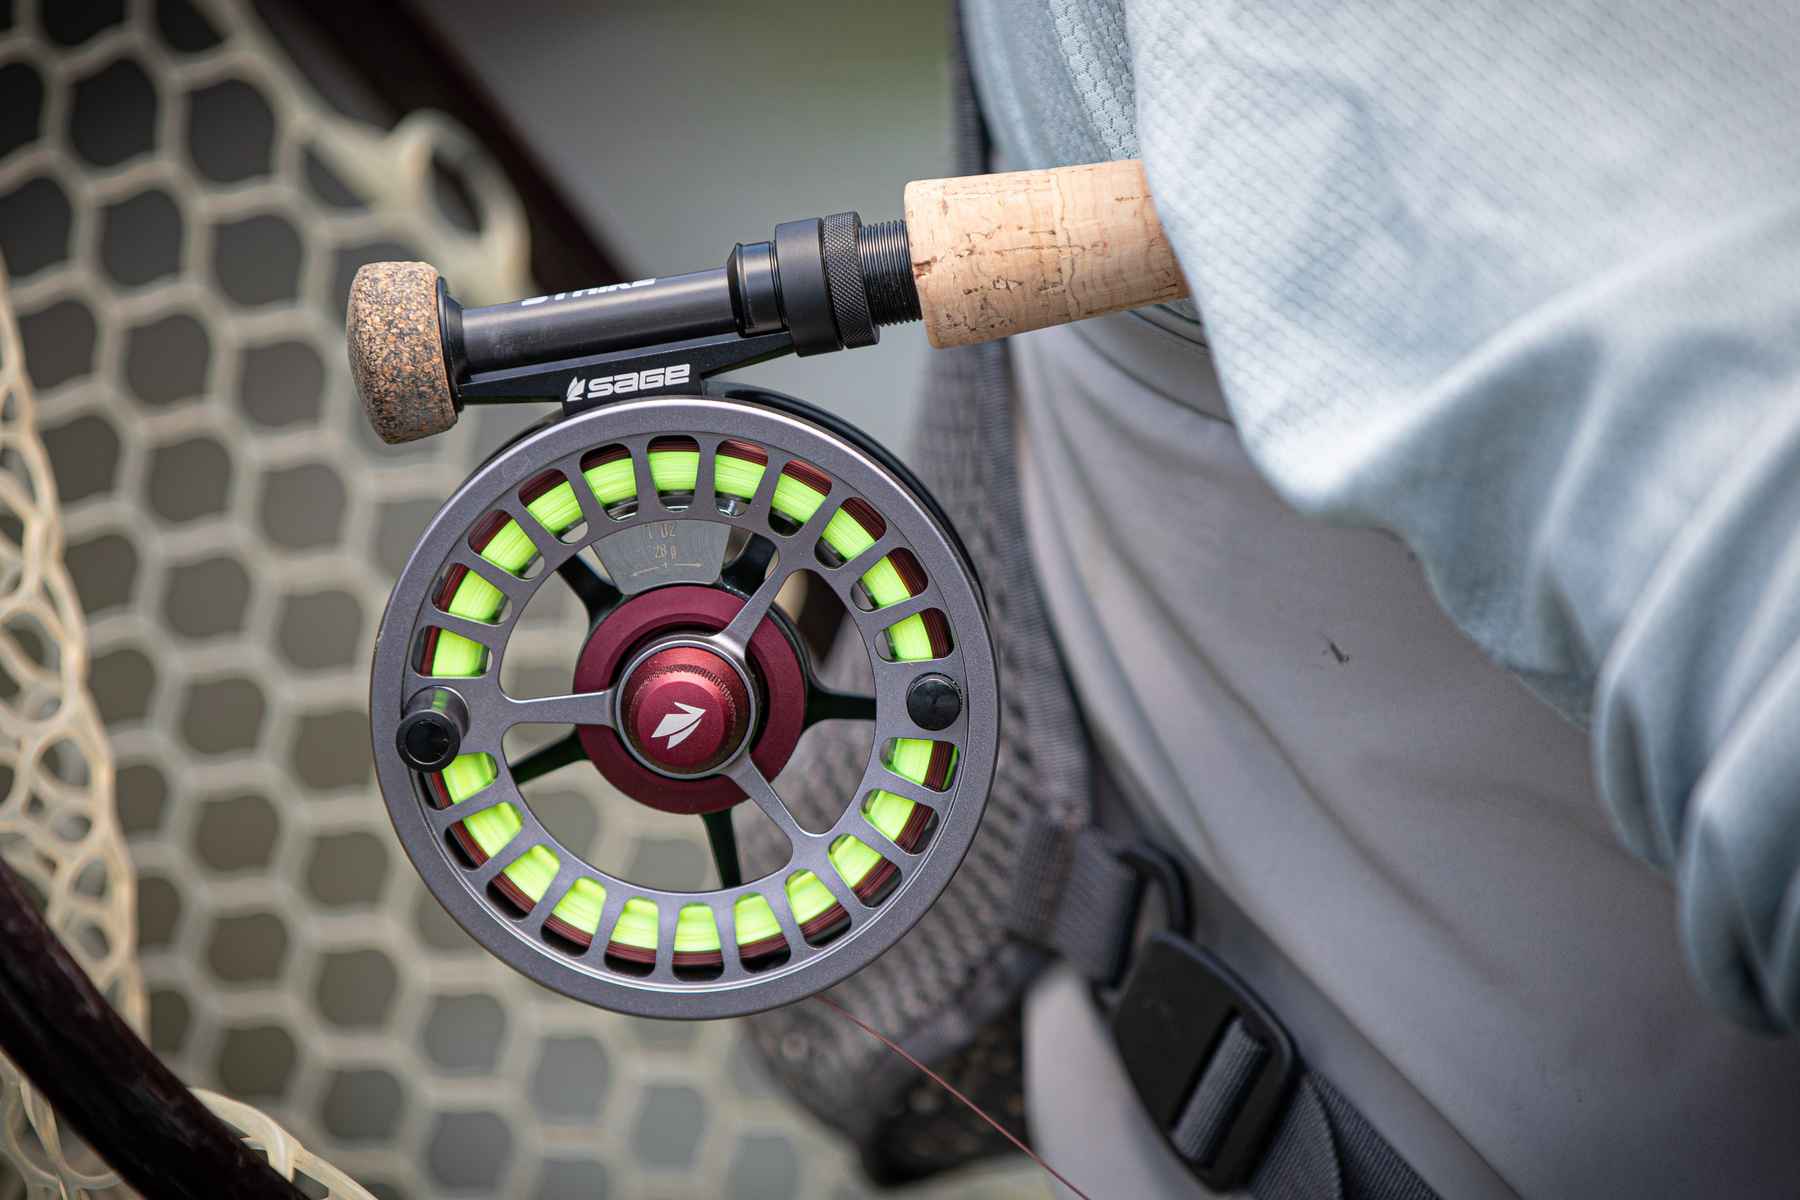 Orvis Hydros Fly Reel Review (Hands-on & Tested) 